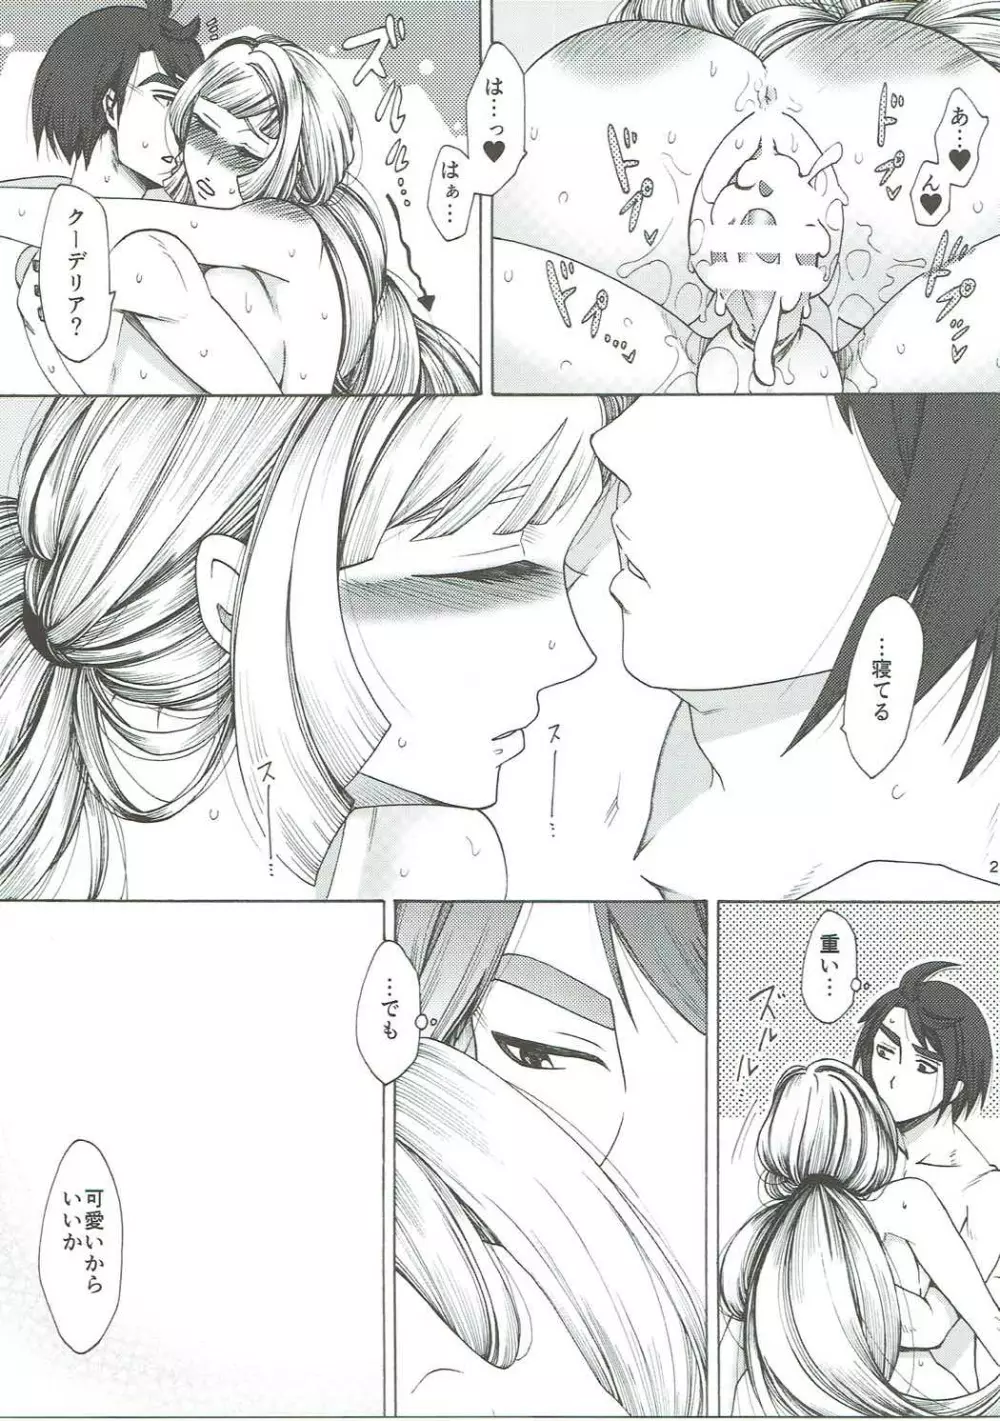 So cute. - page22